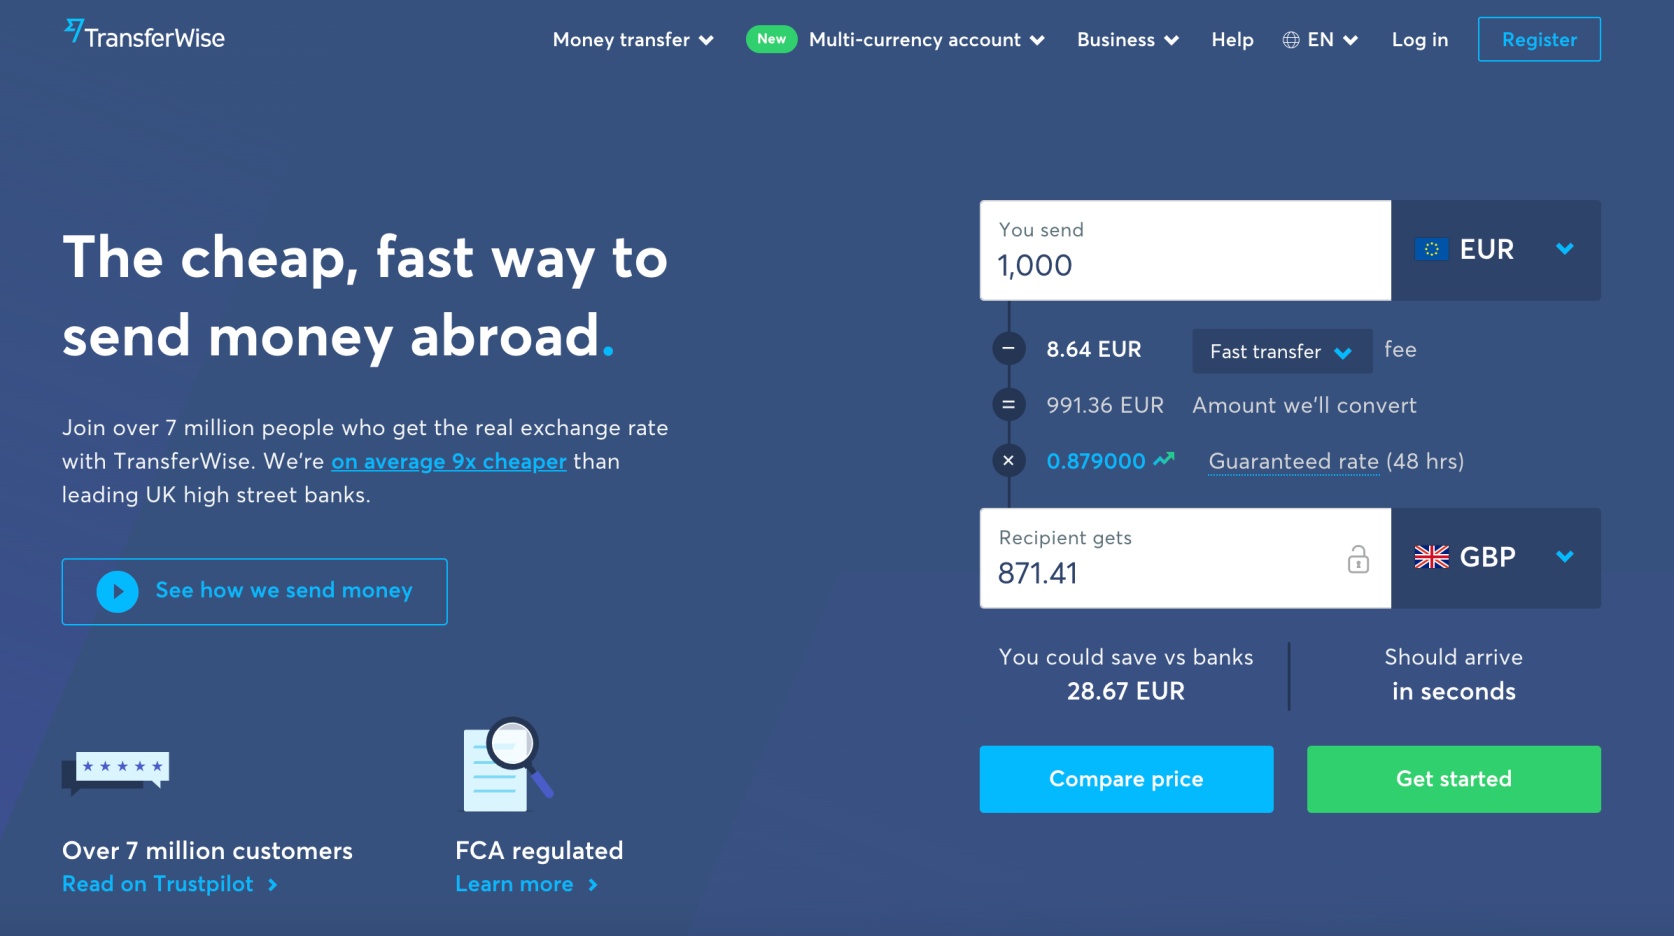 Transferwise landing page example of easy-to-use service